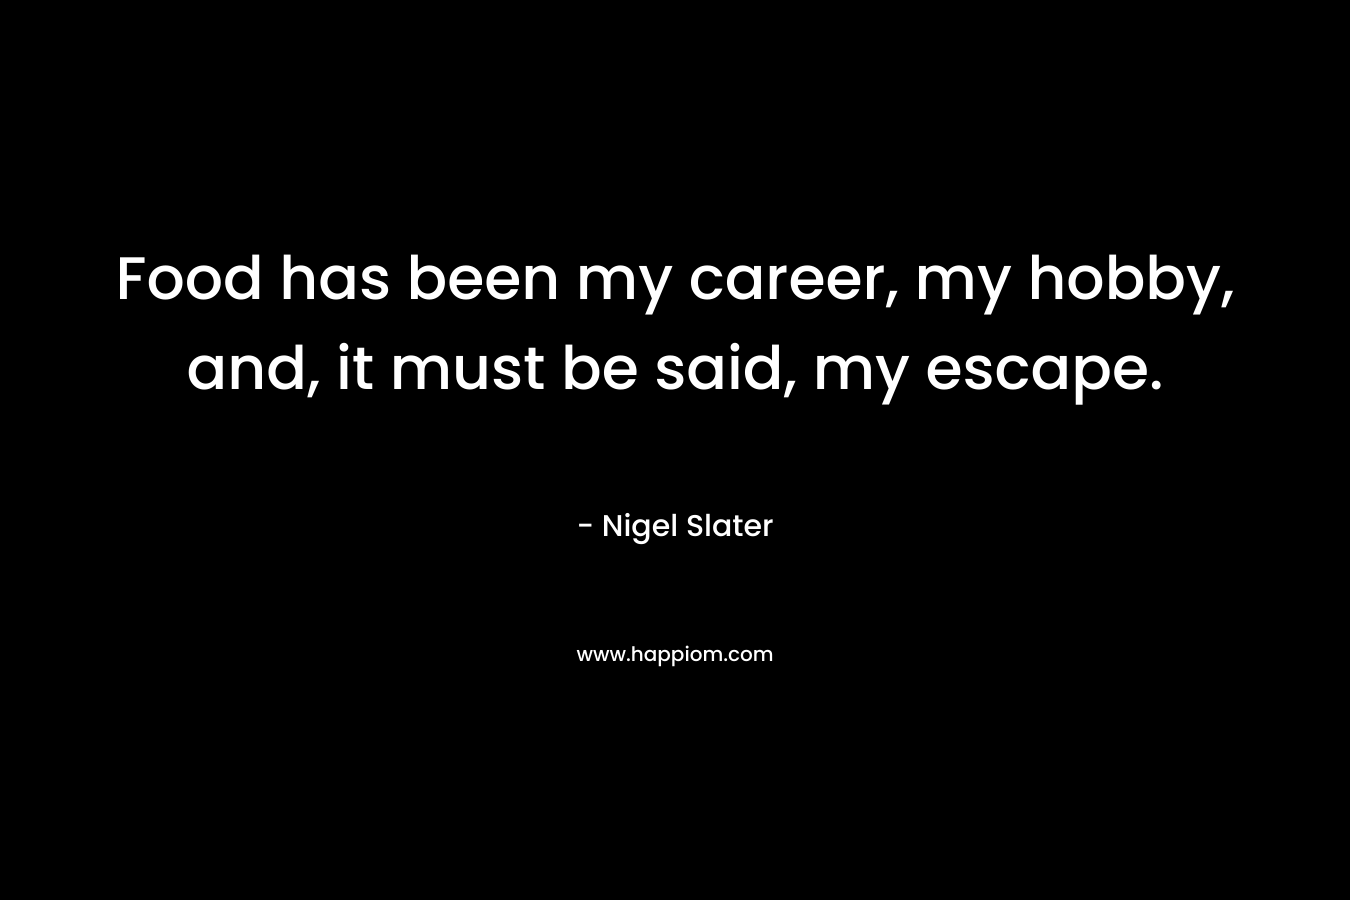 Food has been my career, my hobby, and, it must be said, my escape. – Nigel Slater